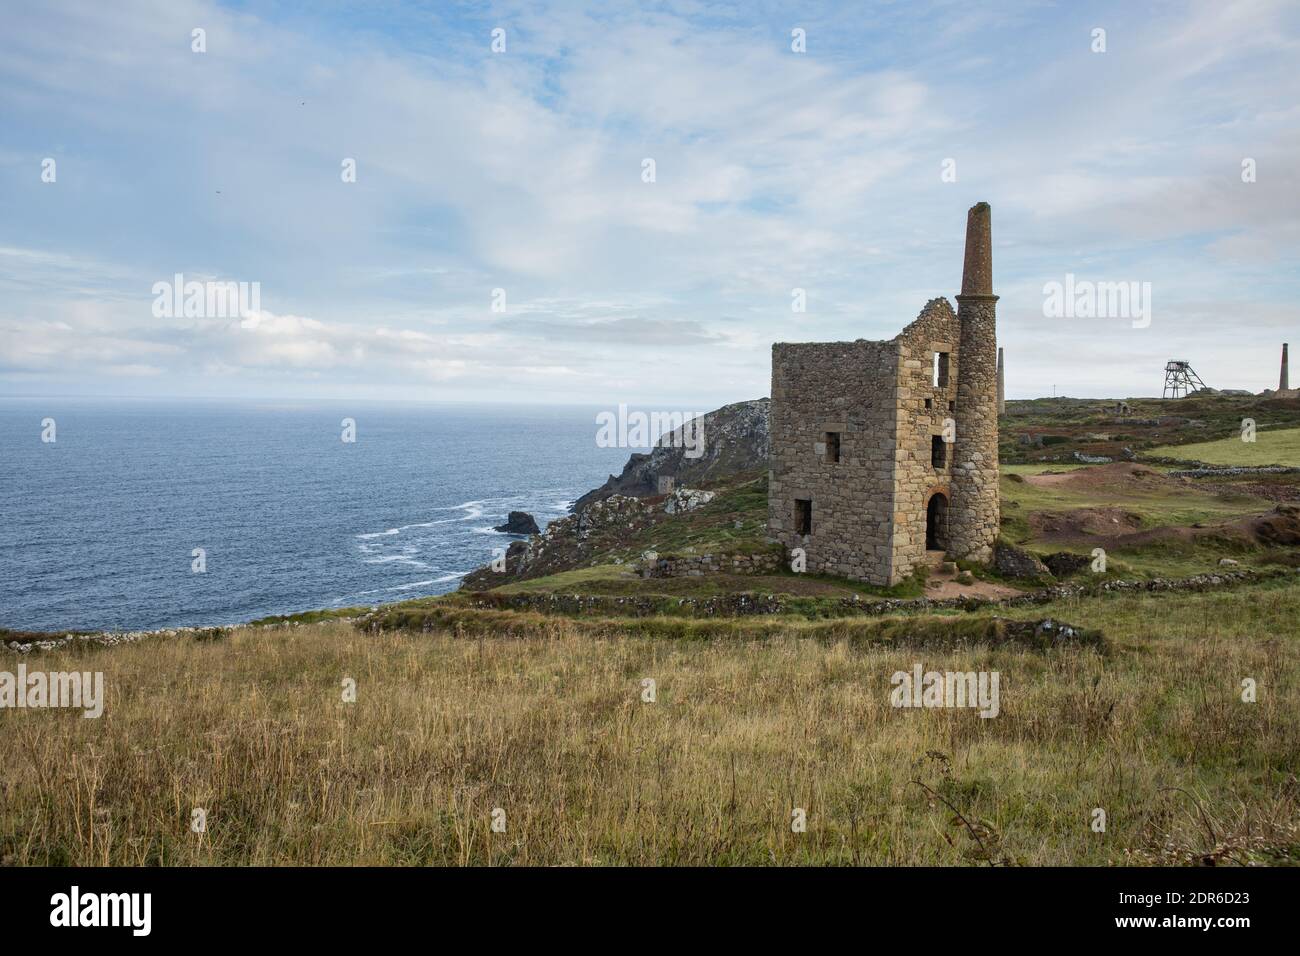 Botallack tin mine ruins in Cornwall seen from the South West Coast footpath with the Atlantic Ocean in the background Stock Photo